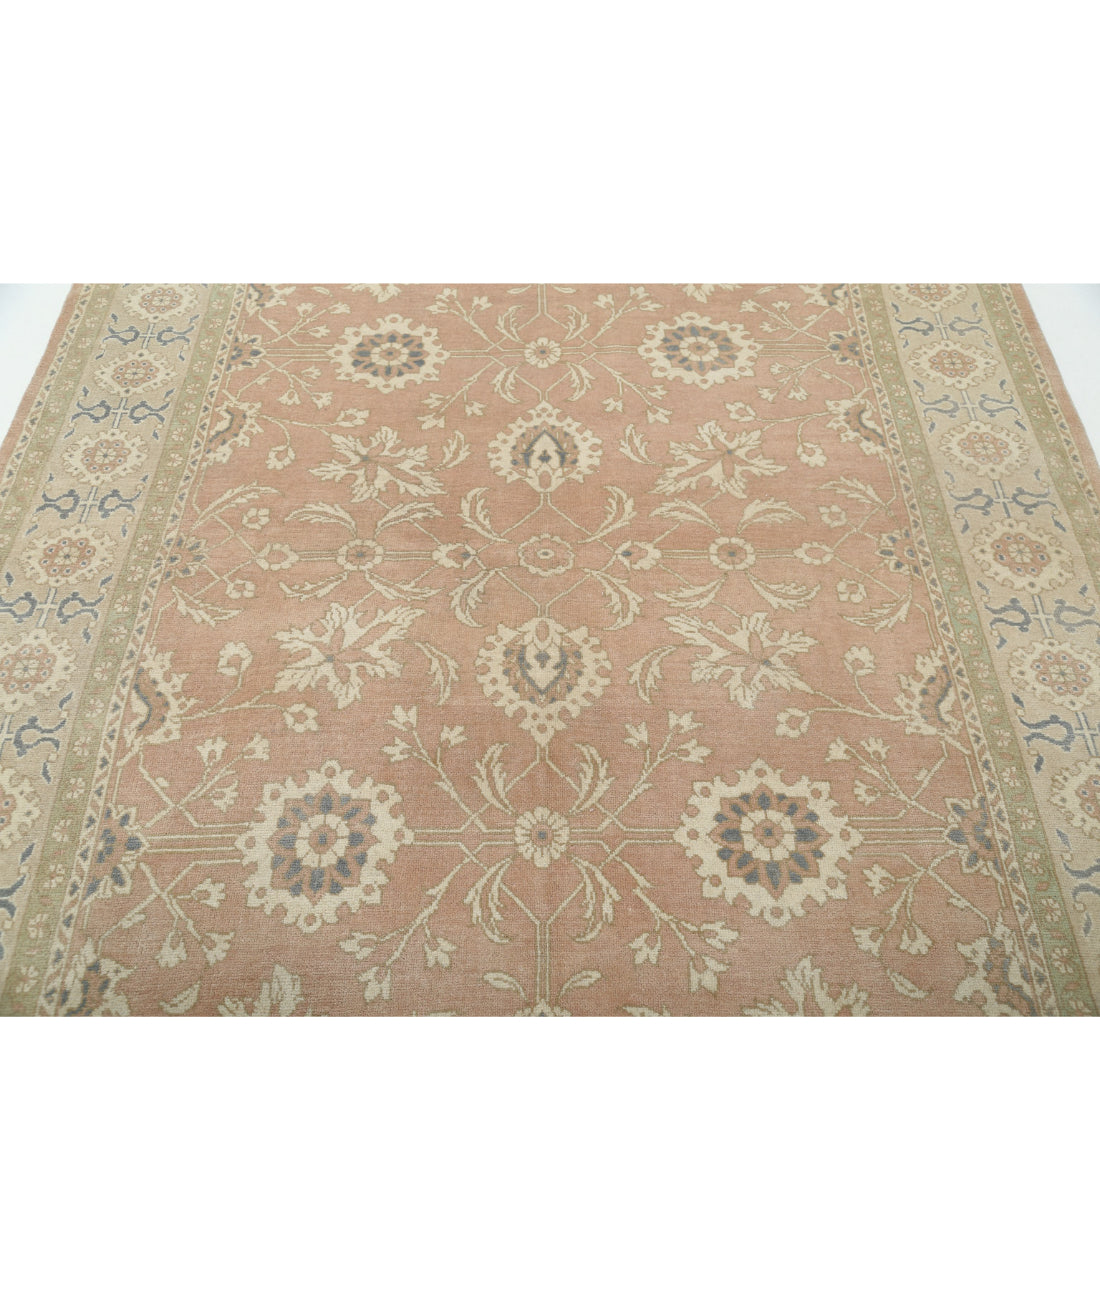 Hand Knotted Turkish Oushak Wool Rug - 6'10'' x 8'5'' 6'10'' x 8'5'' (205 X 253) / Peach / Taupe